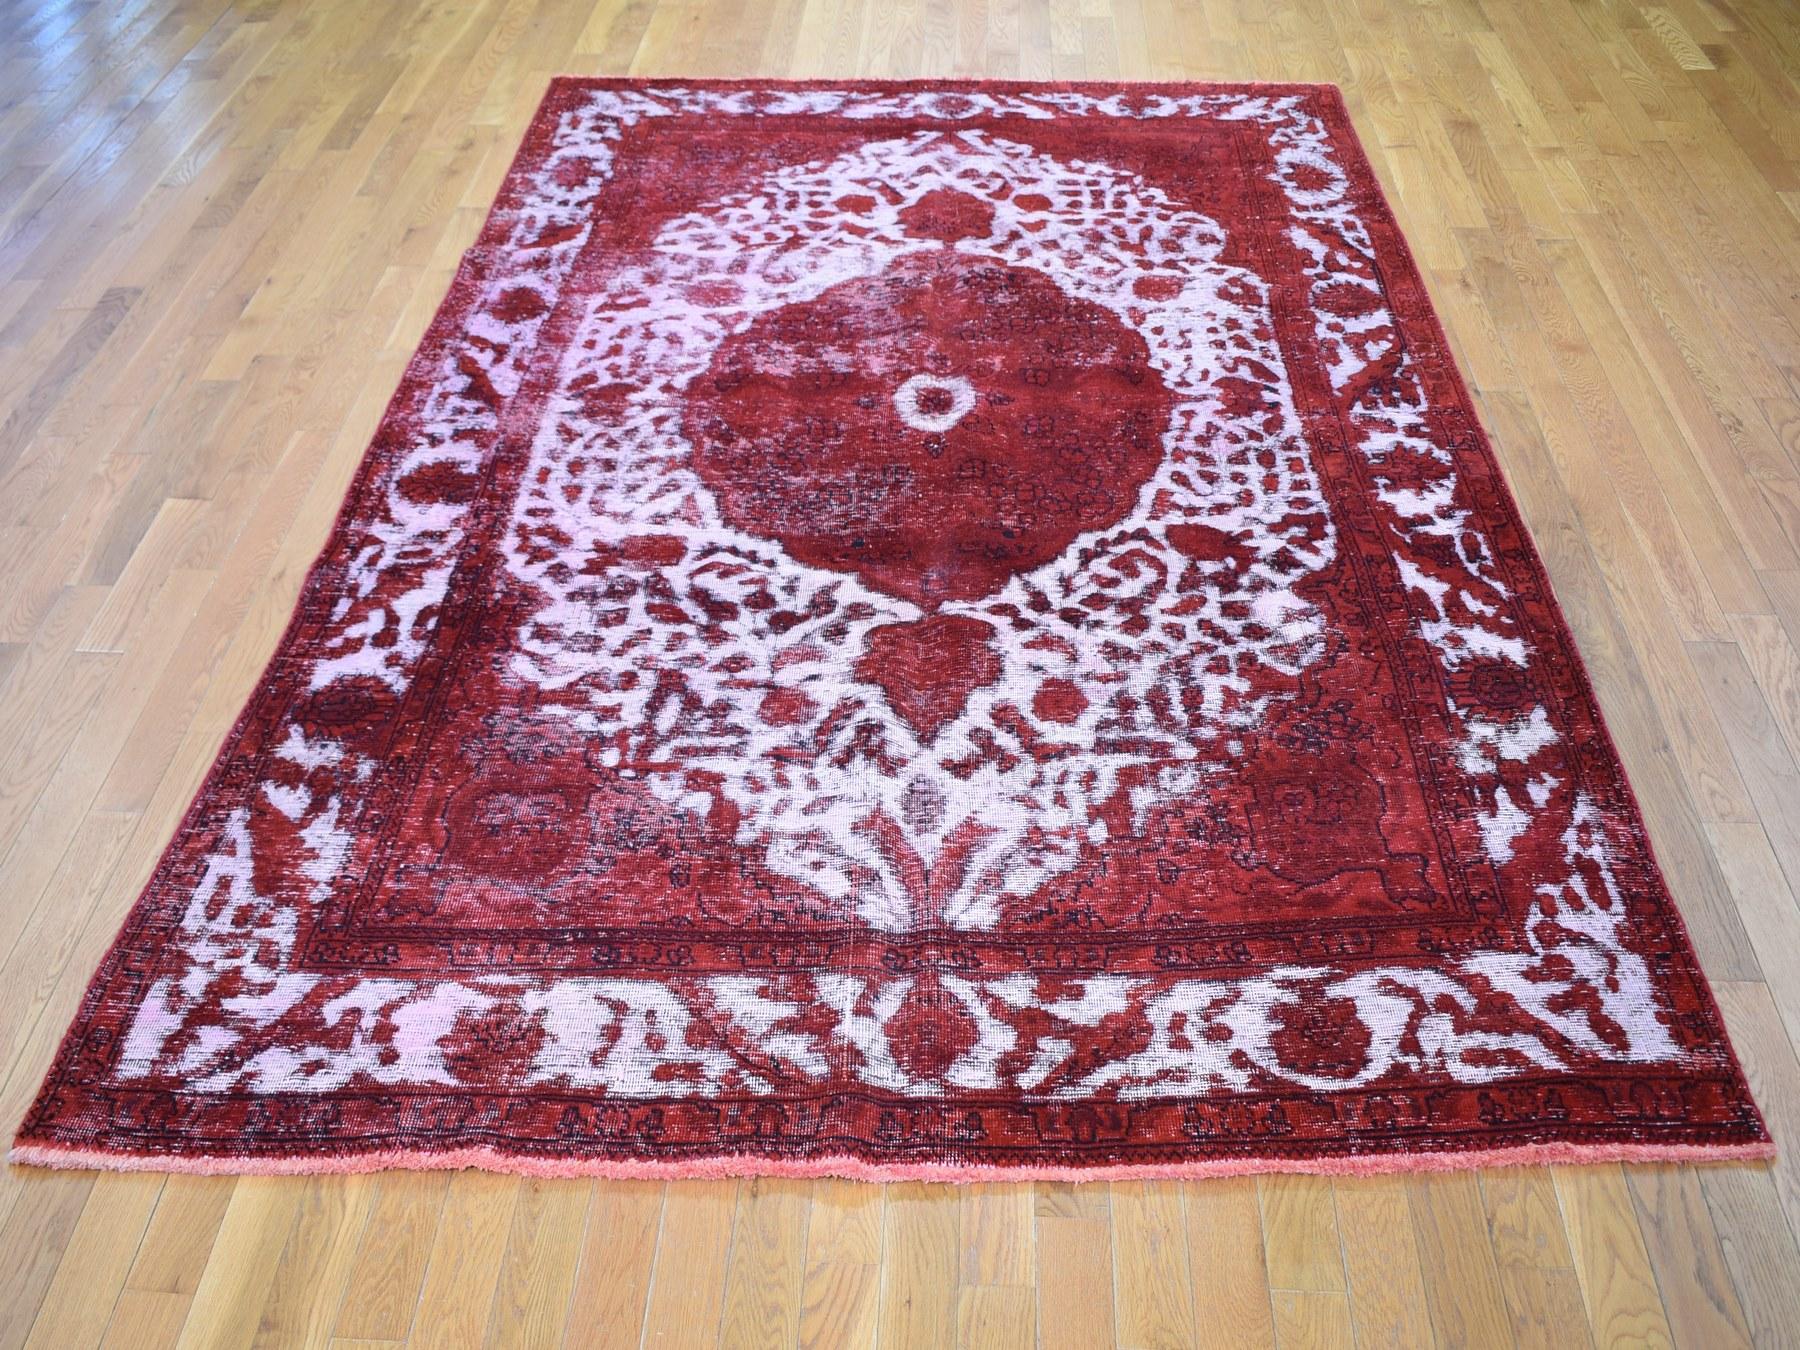 Medieval Red Overdyed Persian Tabriz Worn Wool Hand Knotted Oriental Rug